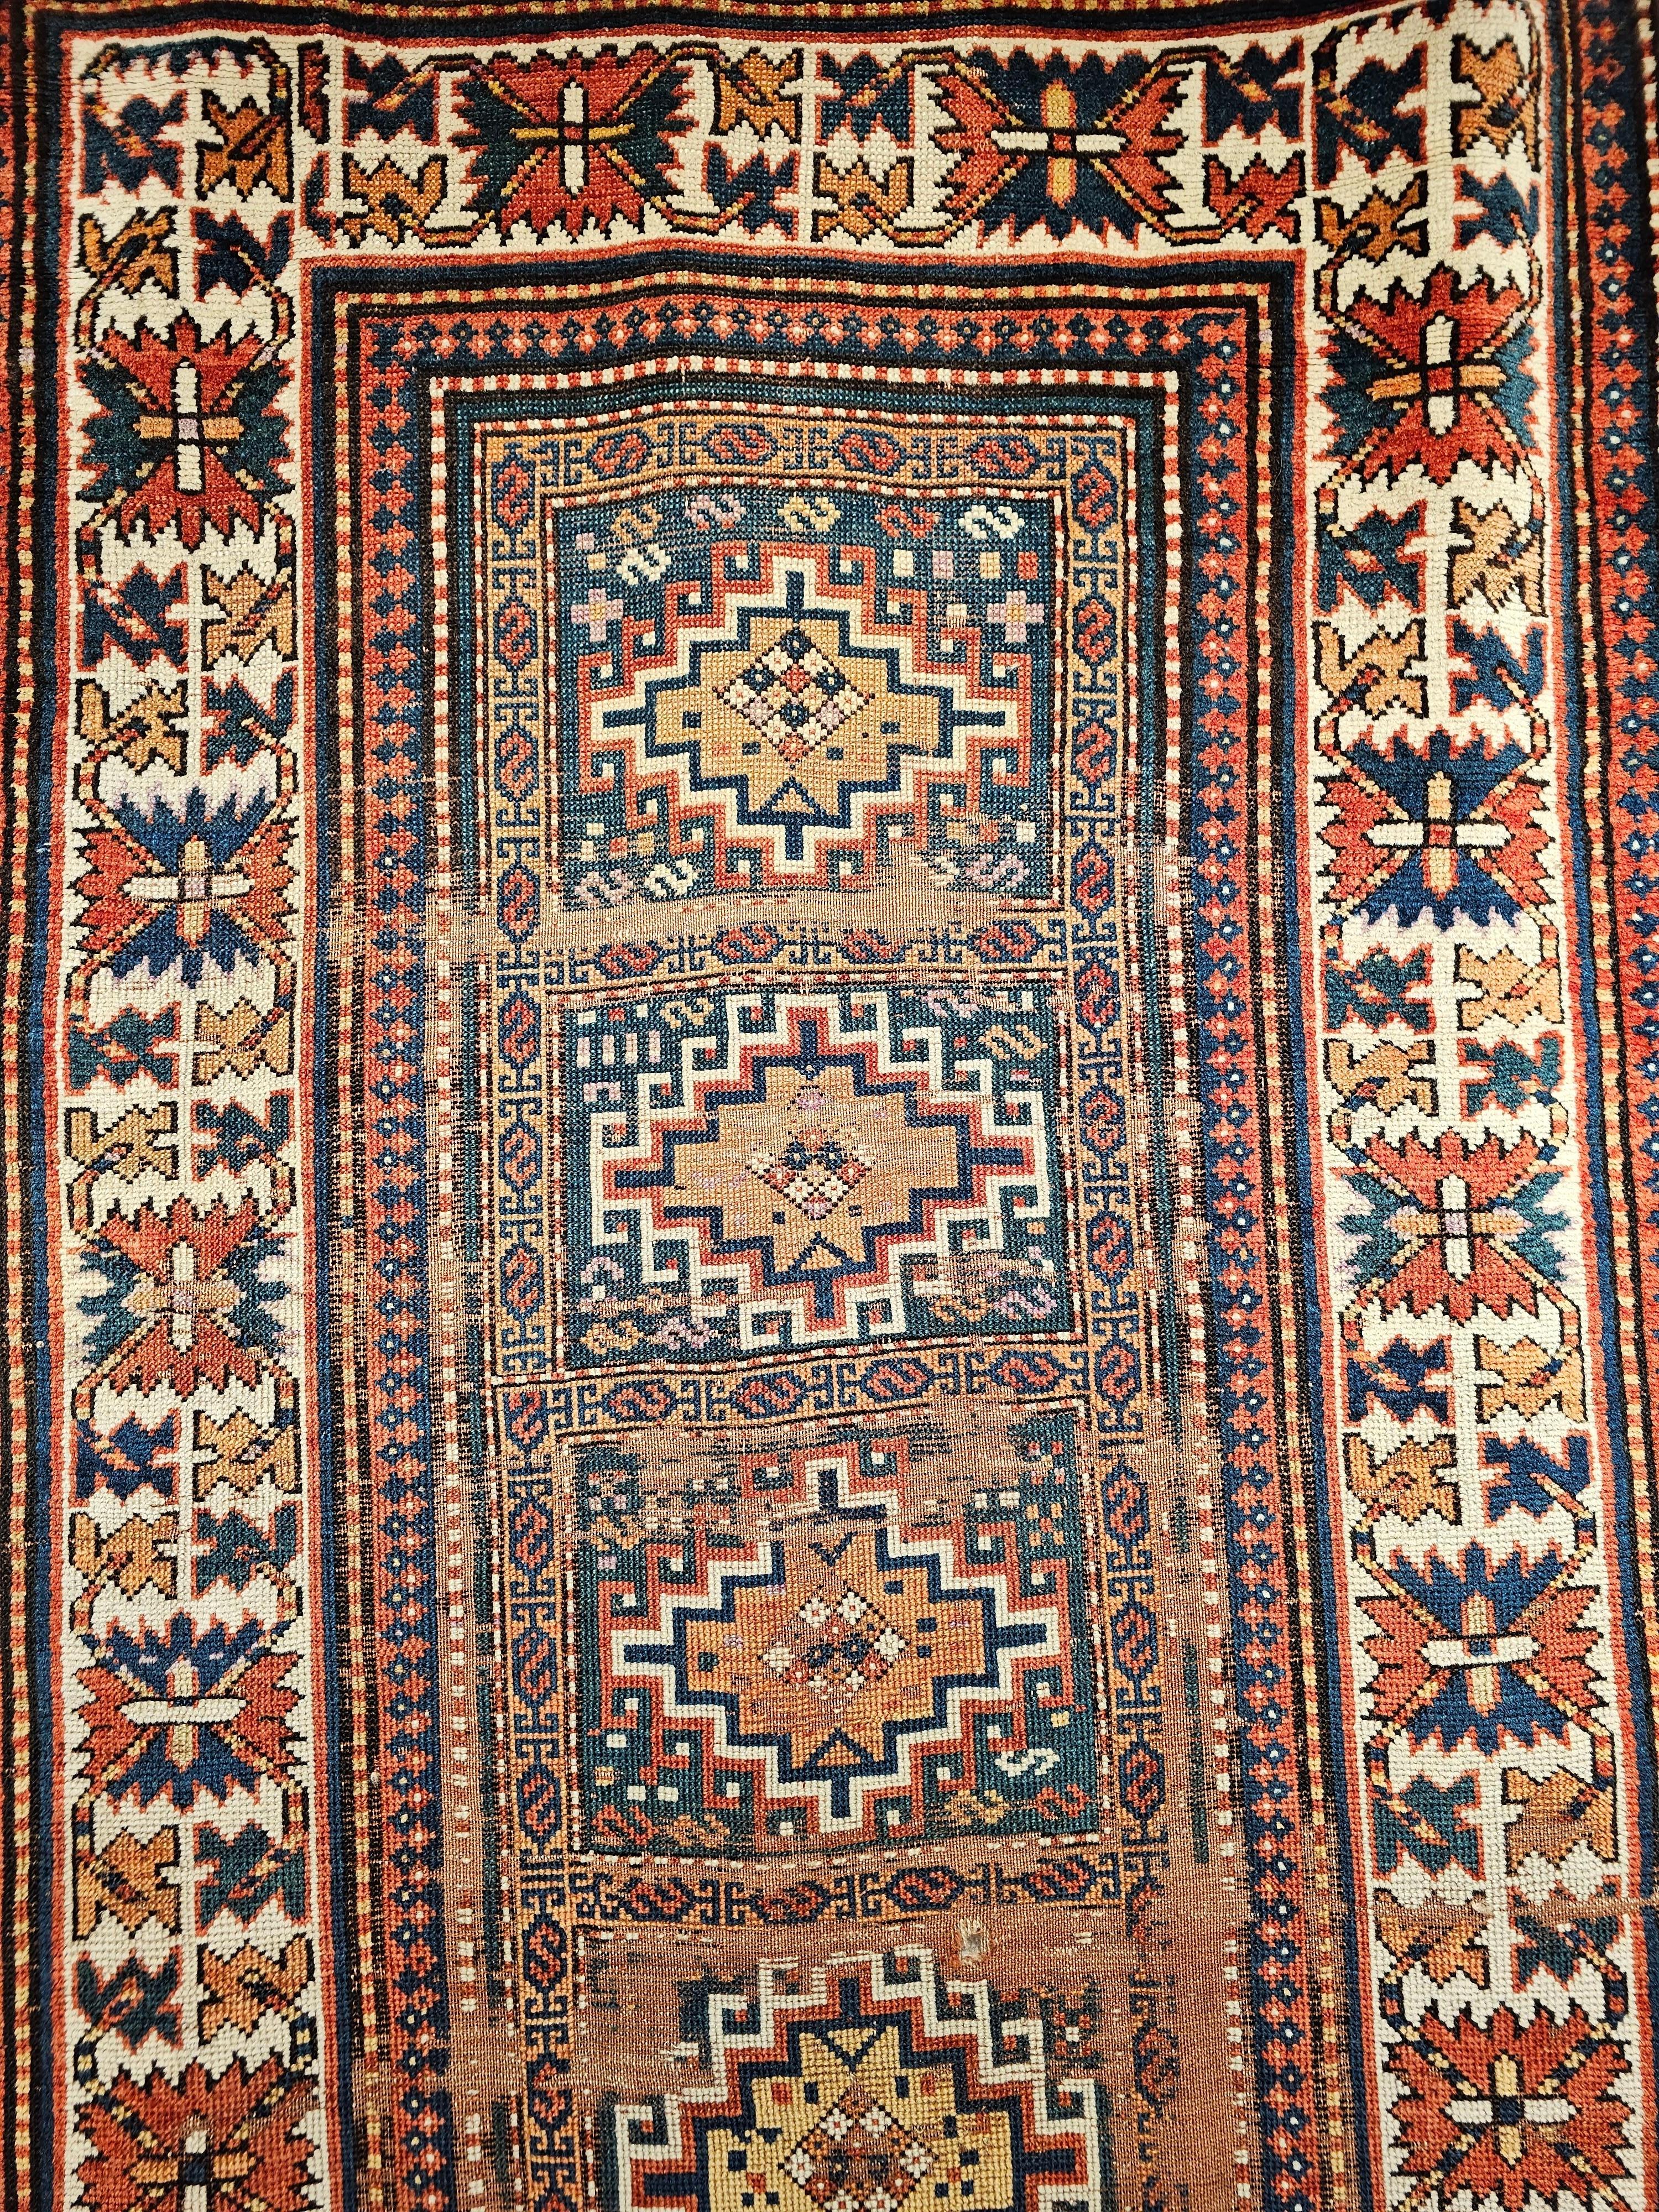 19th Century Caucasian Kazak Area Rug in Geometric Pattern in Blue, Ivory, Red In Good Condition For Sale In Barrington, IL